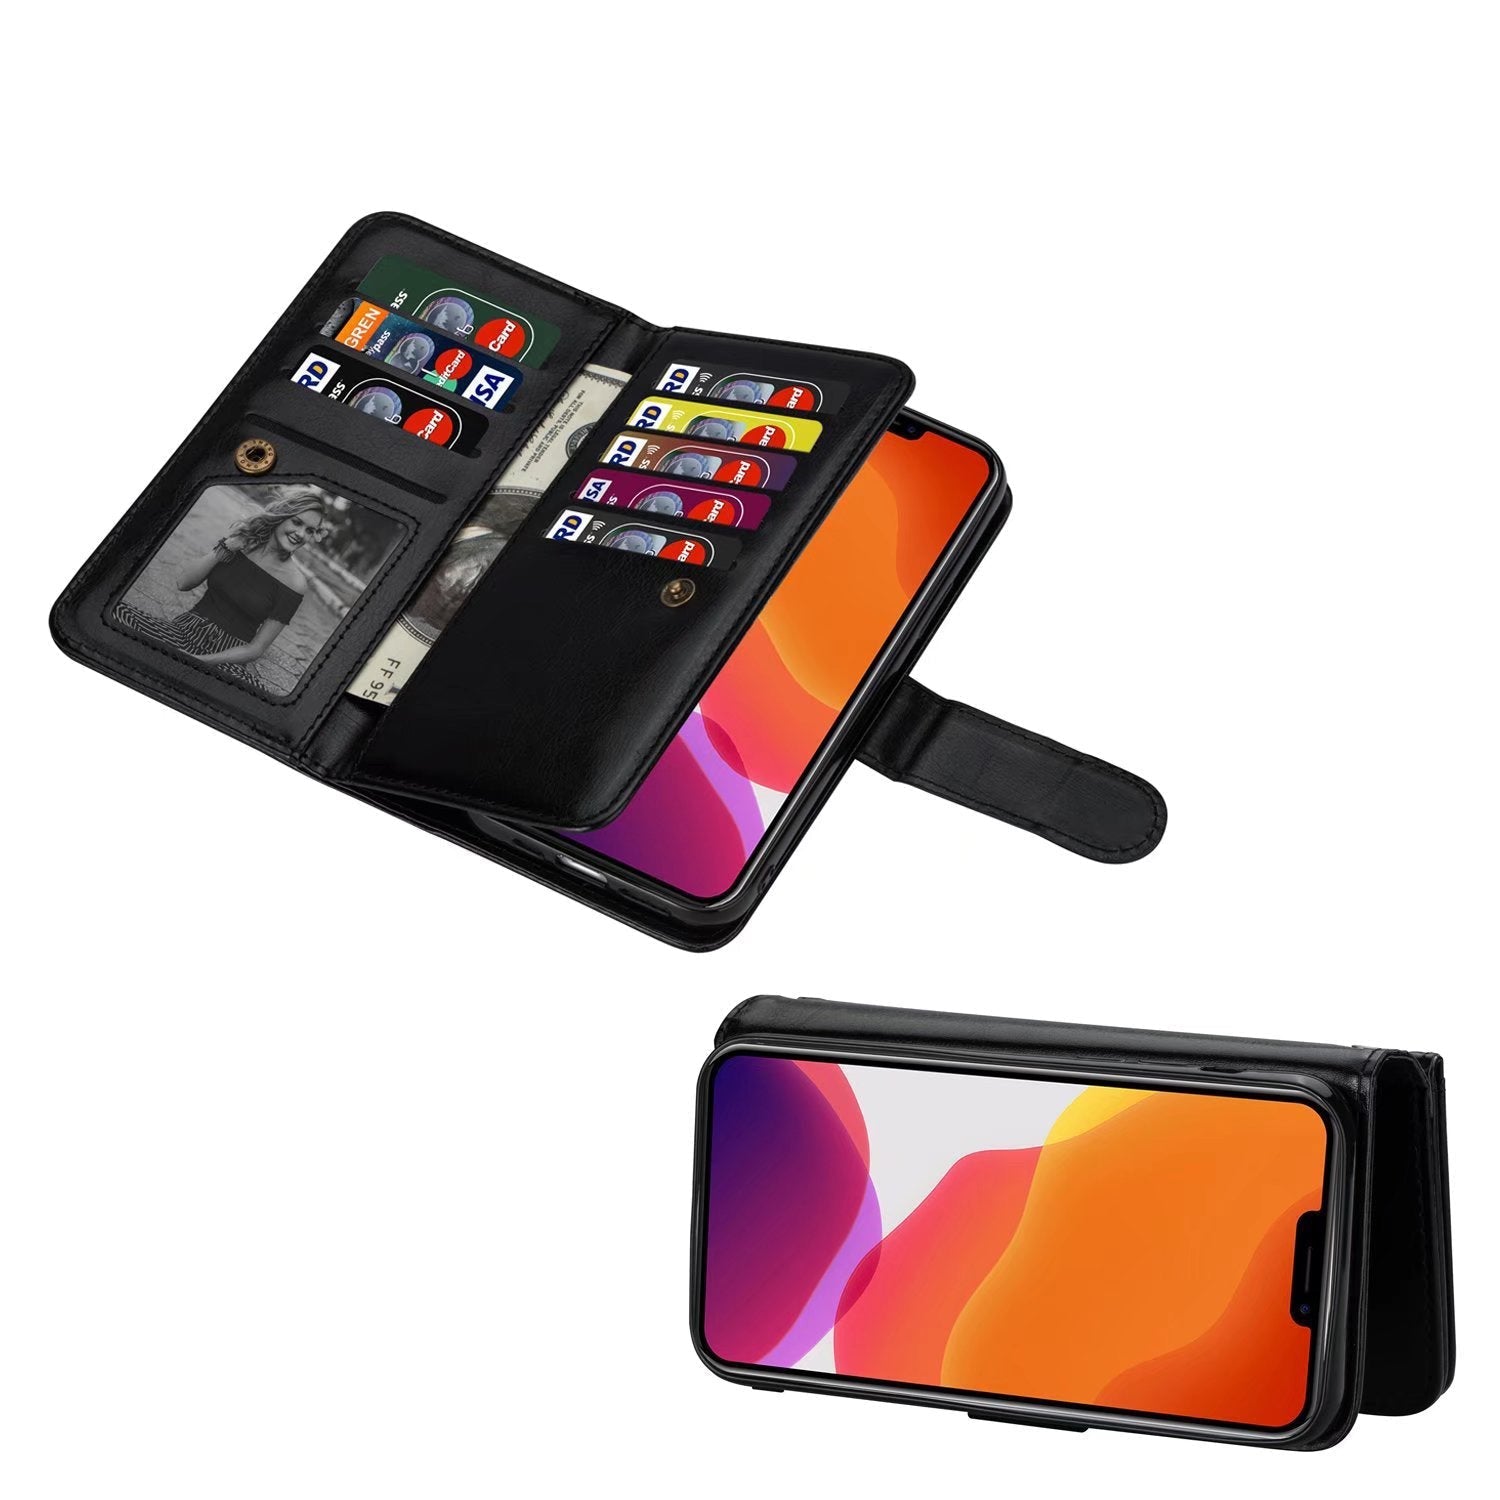 Galaxy S10 Plus 2 in 1 Leather Wallet Case with 9 Credit Card Slots and Removable Back Cover